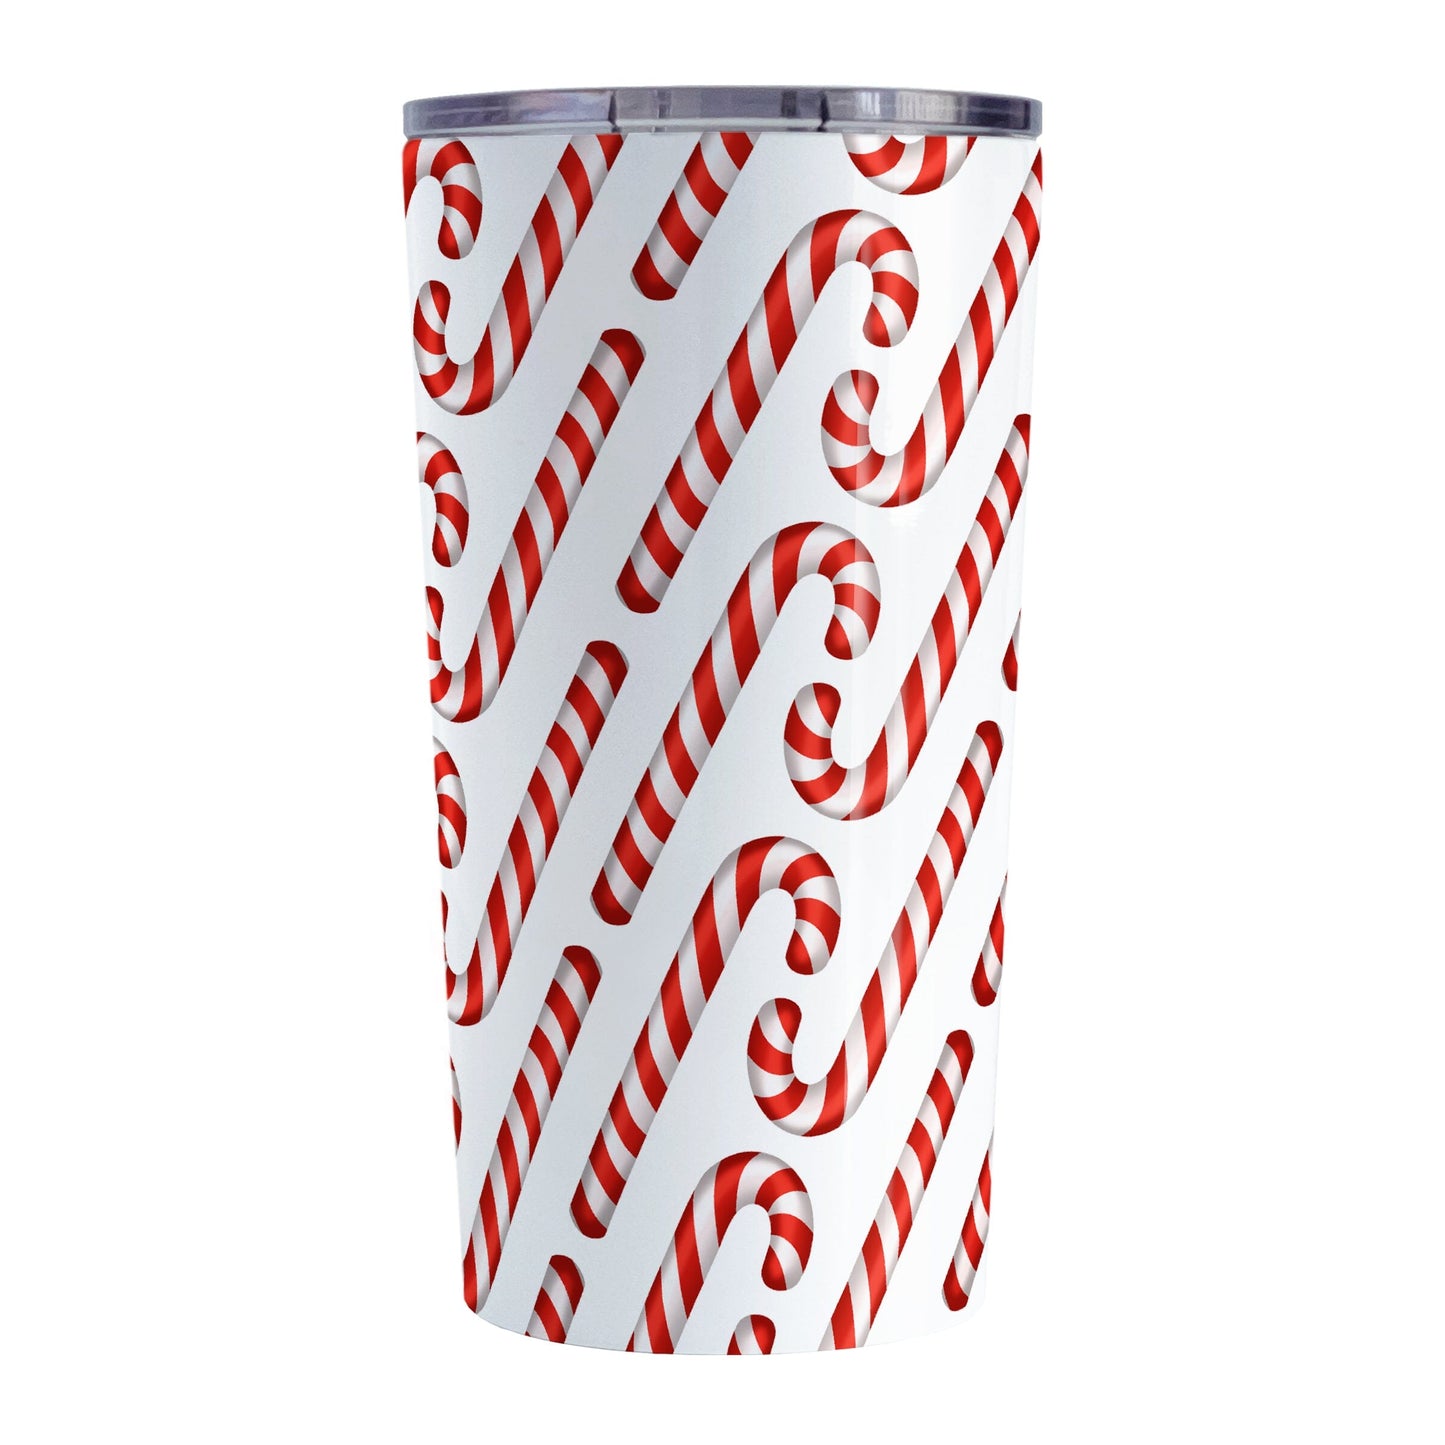 Candy Cane Pattern Tumbler Cup (20oz) at Amy's Coffee Mugs. A stainless steel tumbler cup designed with a diagonal pattern of red and white striped candy canes that wraps around the cup.